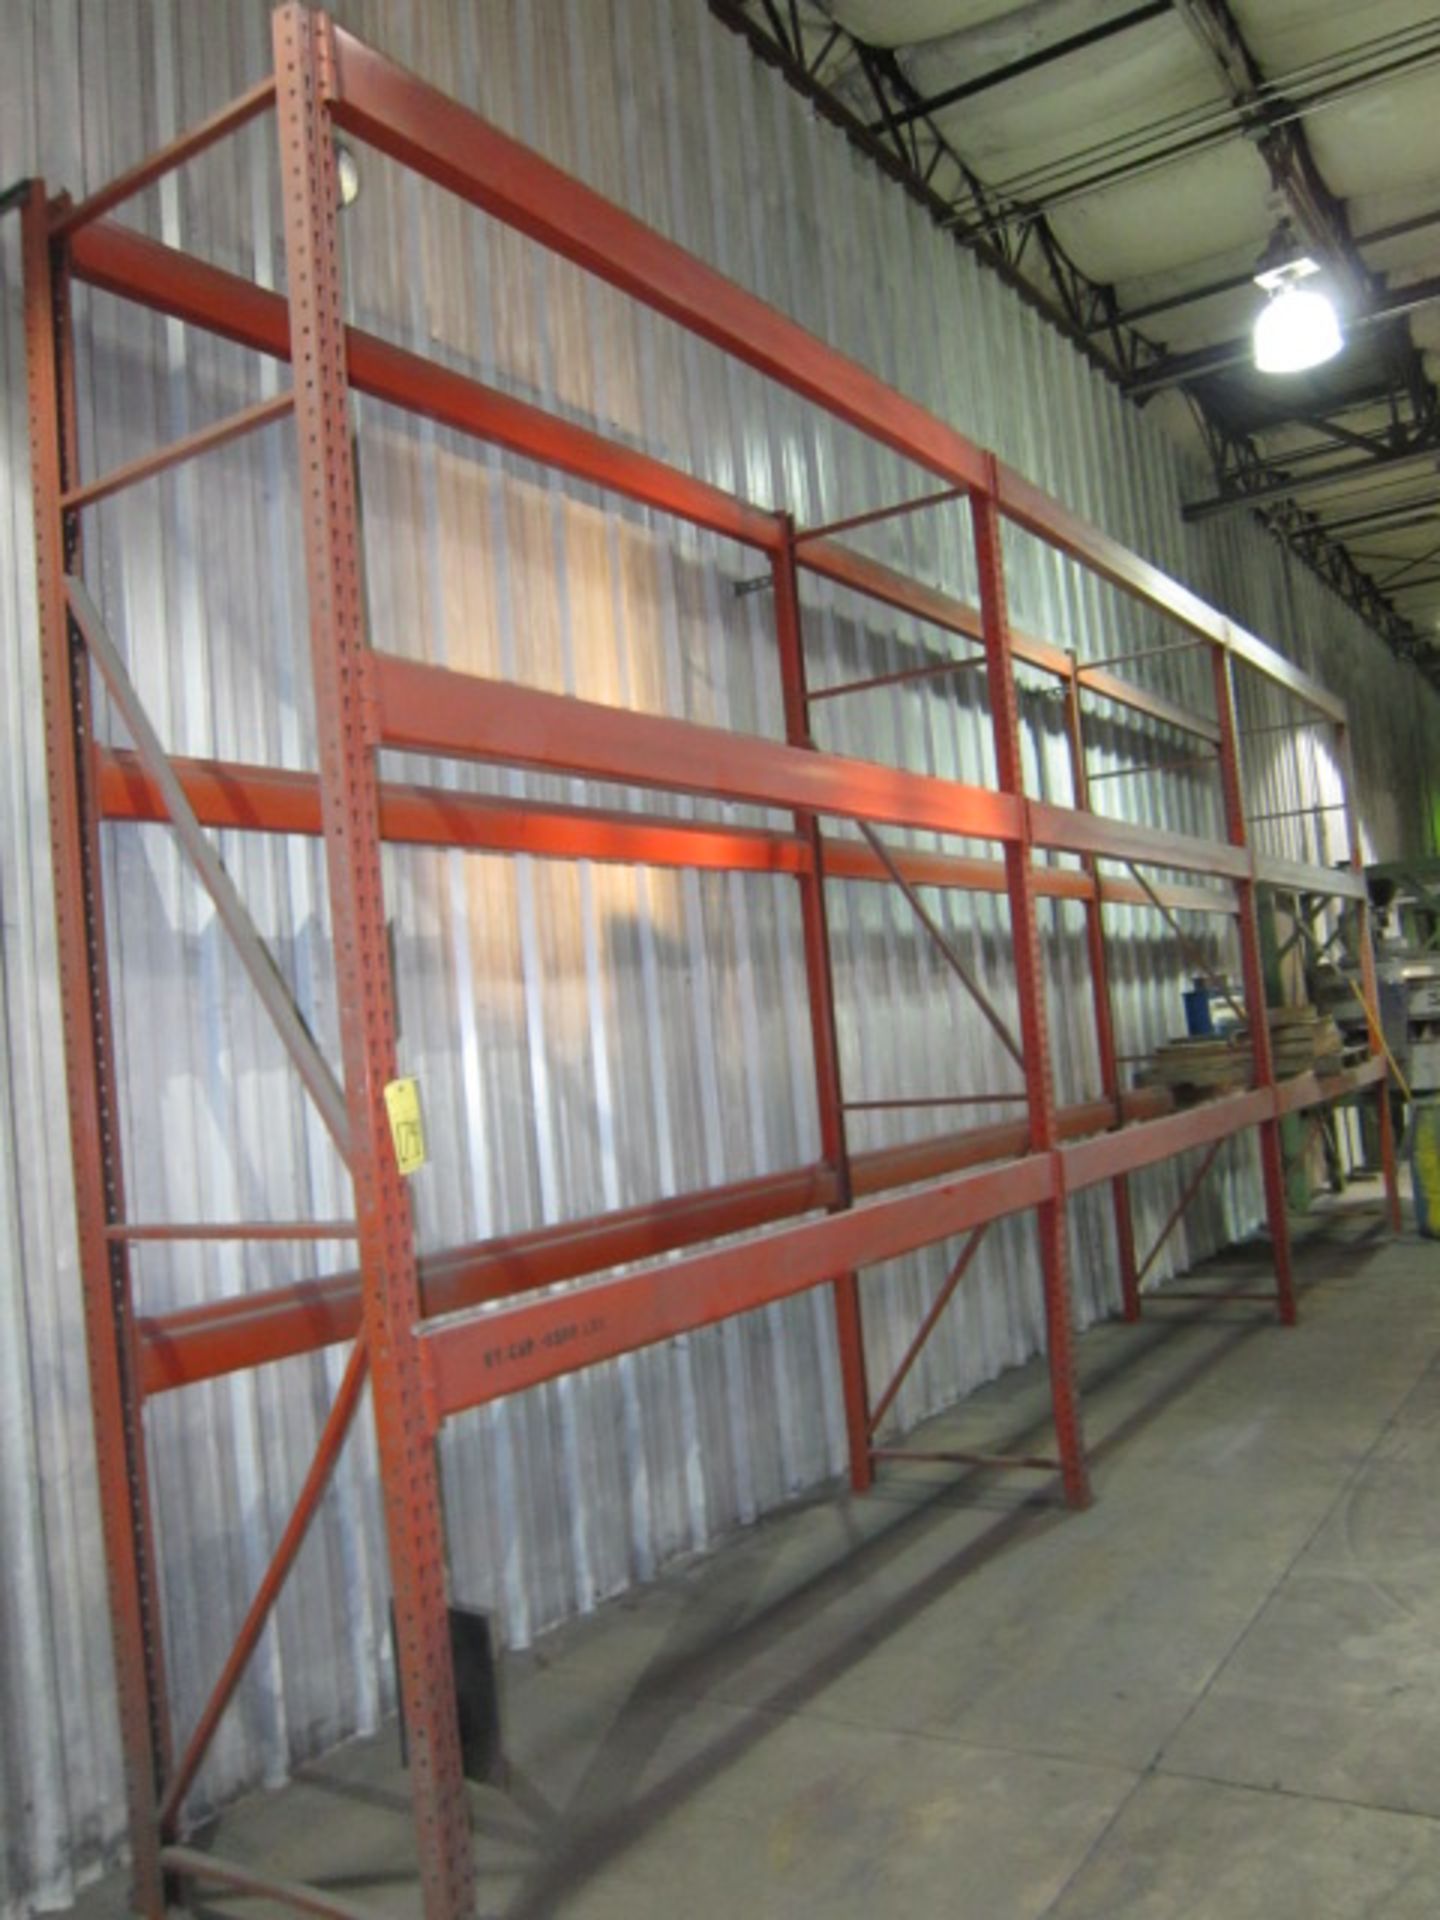 LOT OF PALLET RACK SECTIONS (3), 12' ht. x 10"W. x 3' dp.